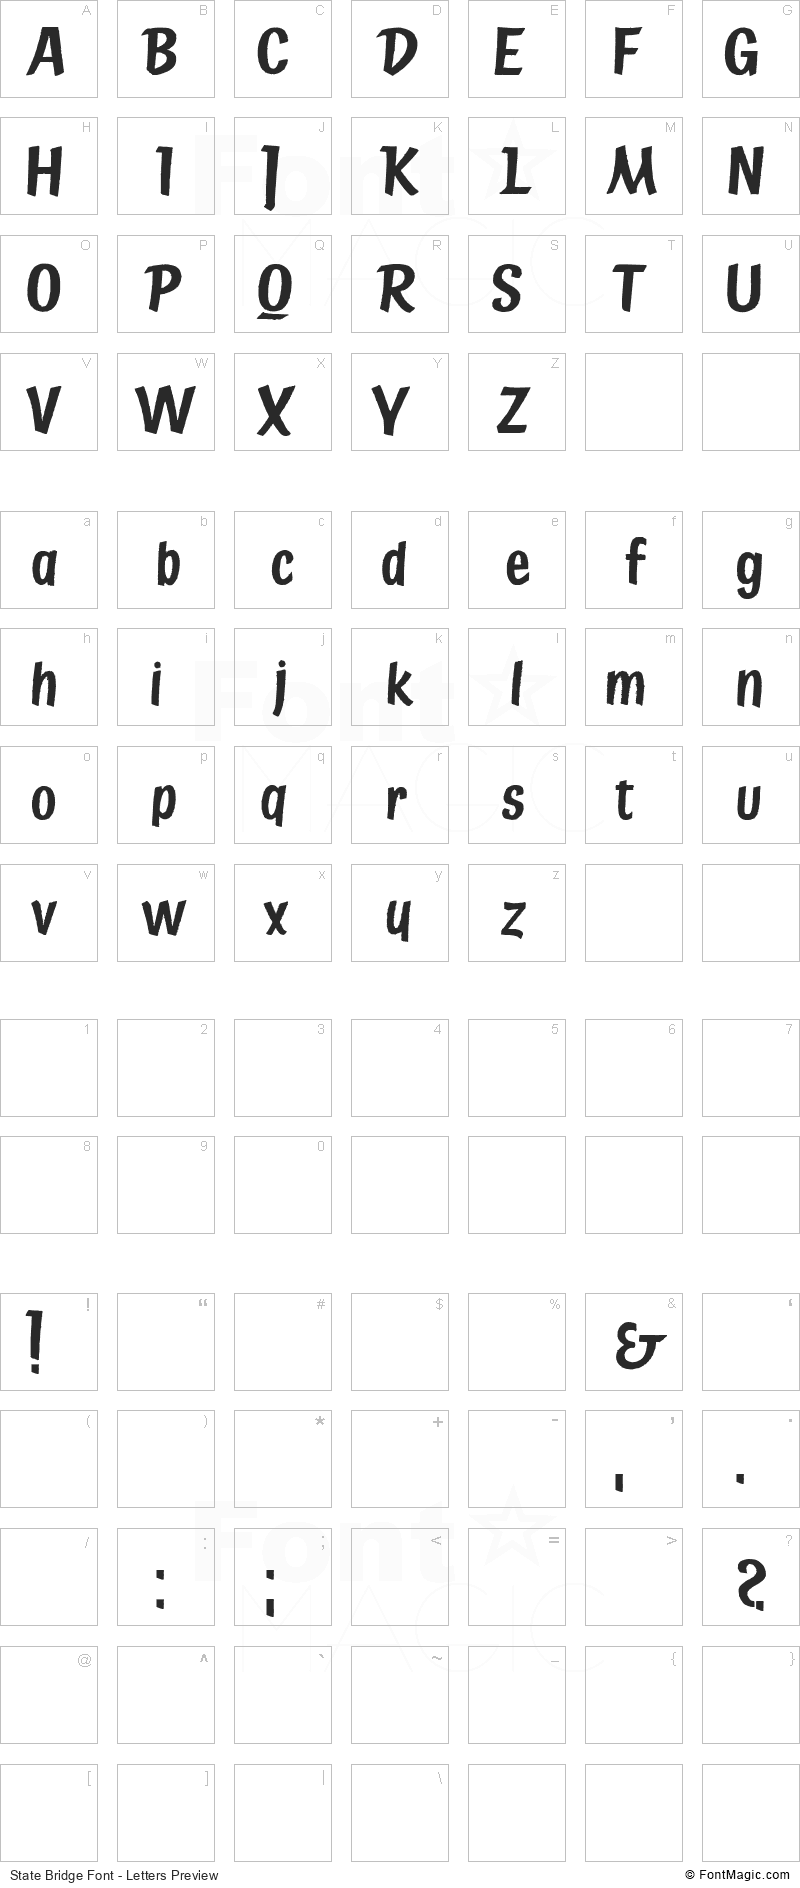 State Bridge Font - All Latters Preview Chart